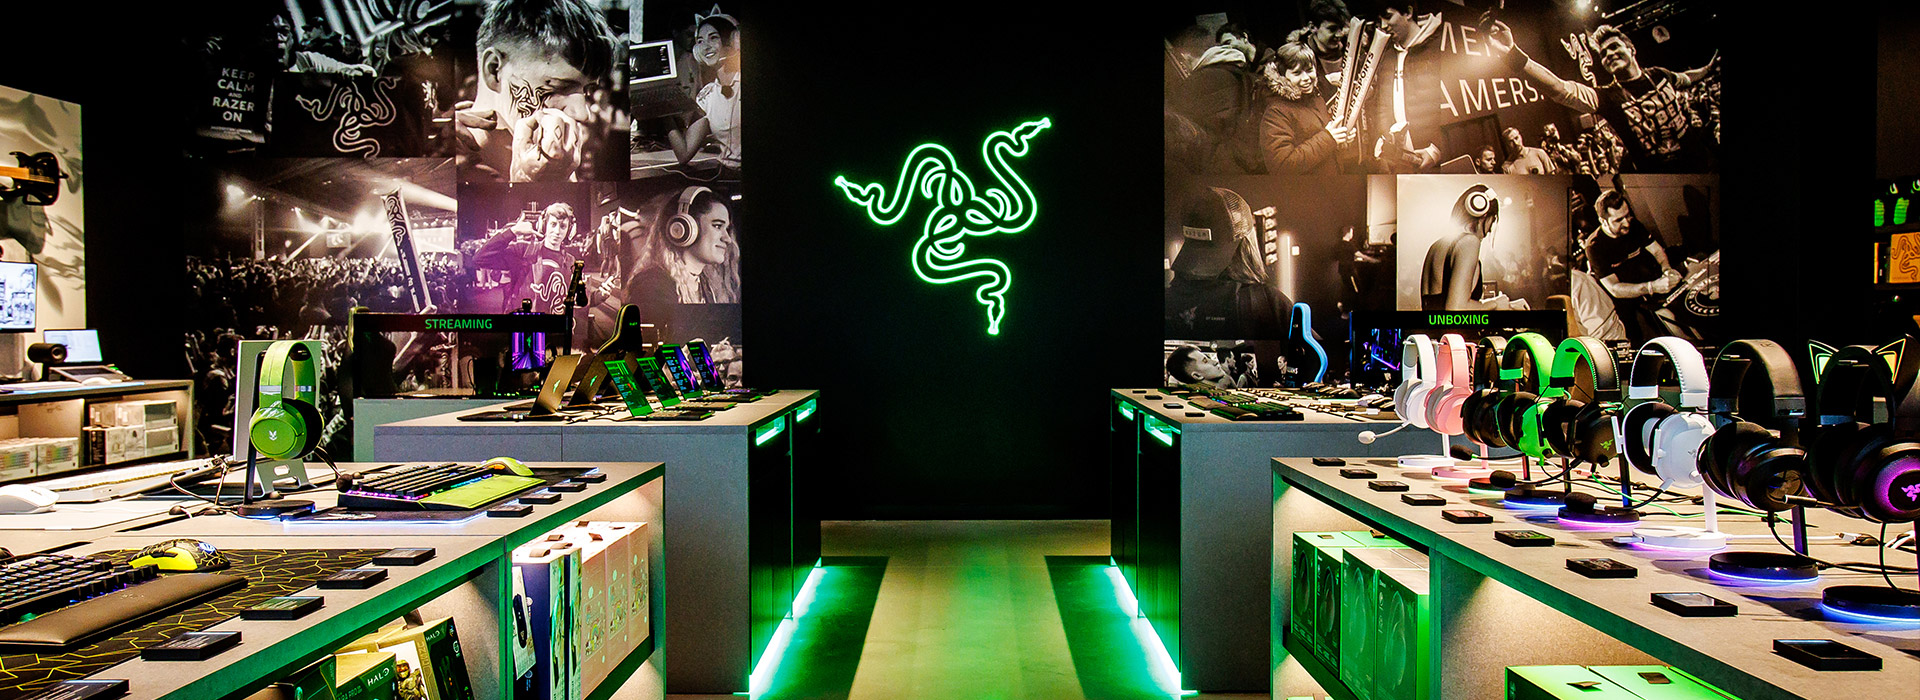 EXPERIENCE THE RAZER EDGE FOR YOURSELF